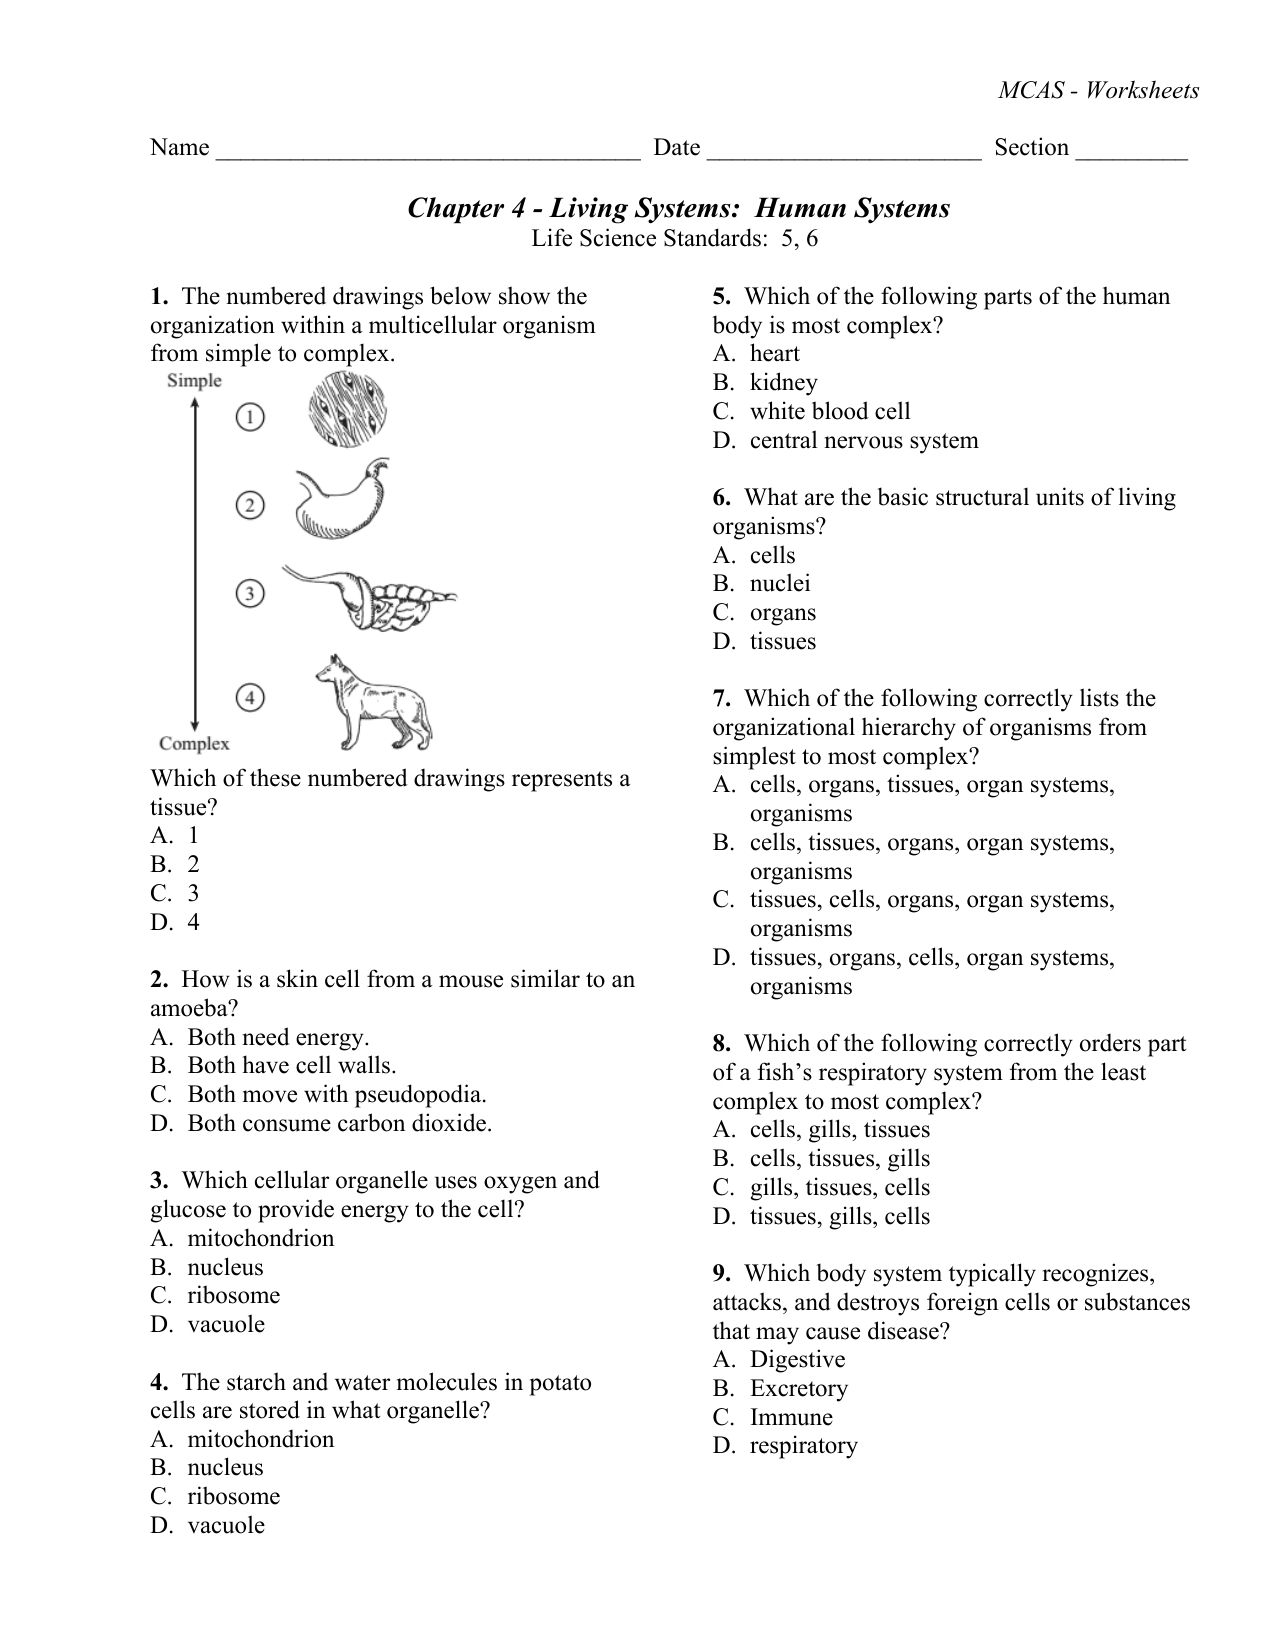 Chapter 4  Living Systems Human Systems For Cells Tissues Organs Organ Systems Worksheet